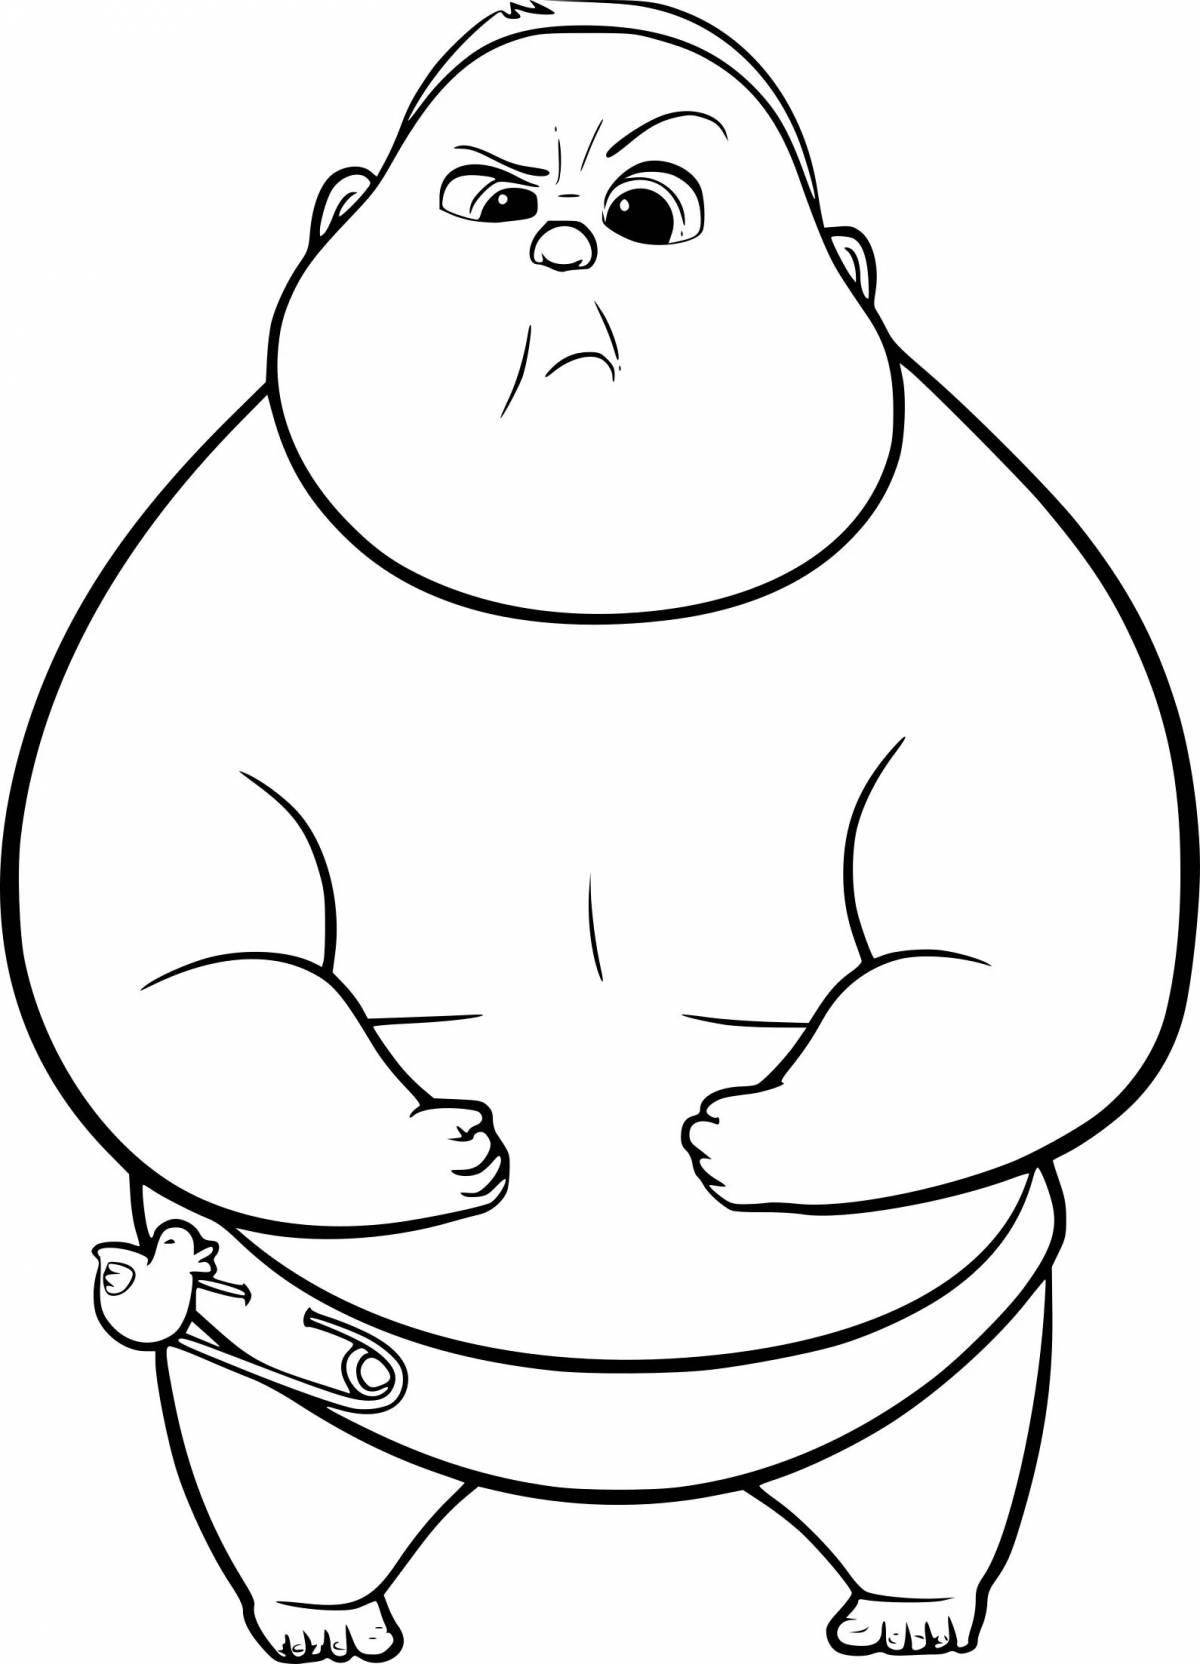 Coloring page adorable baby boss